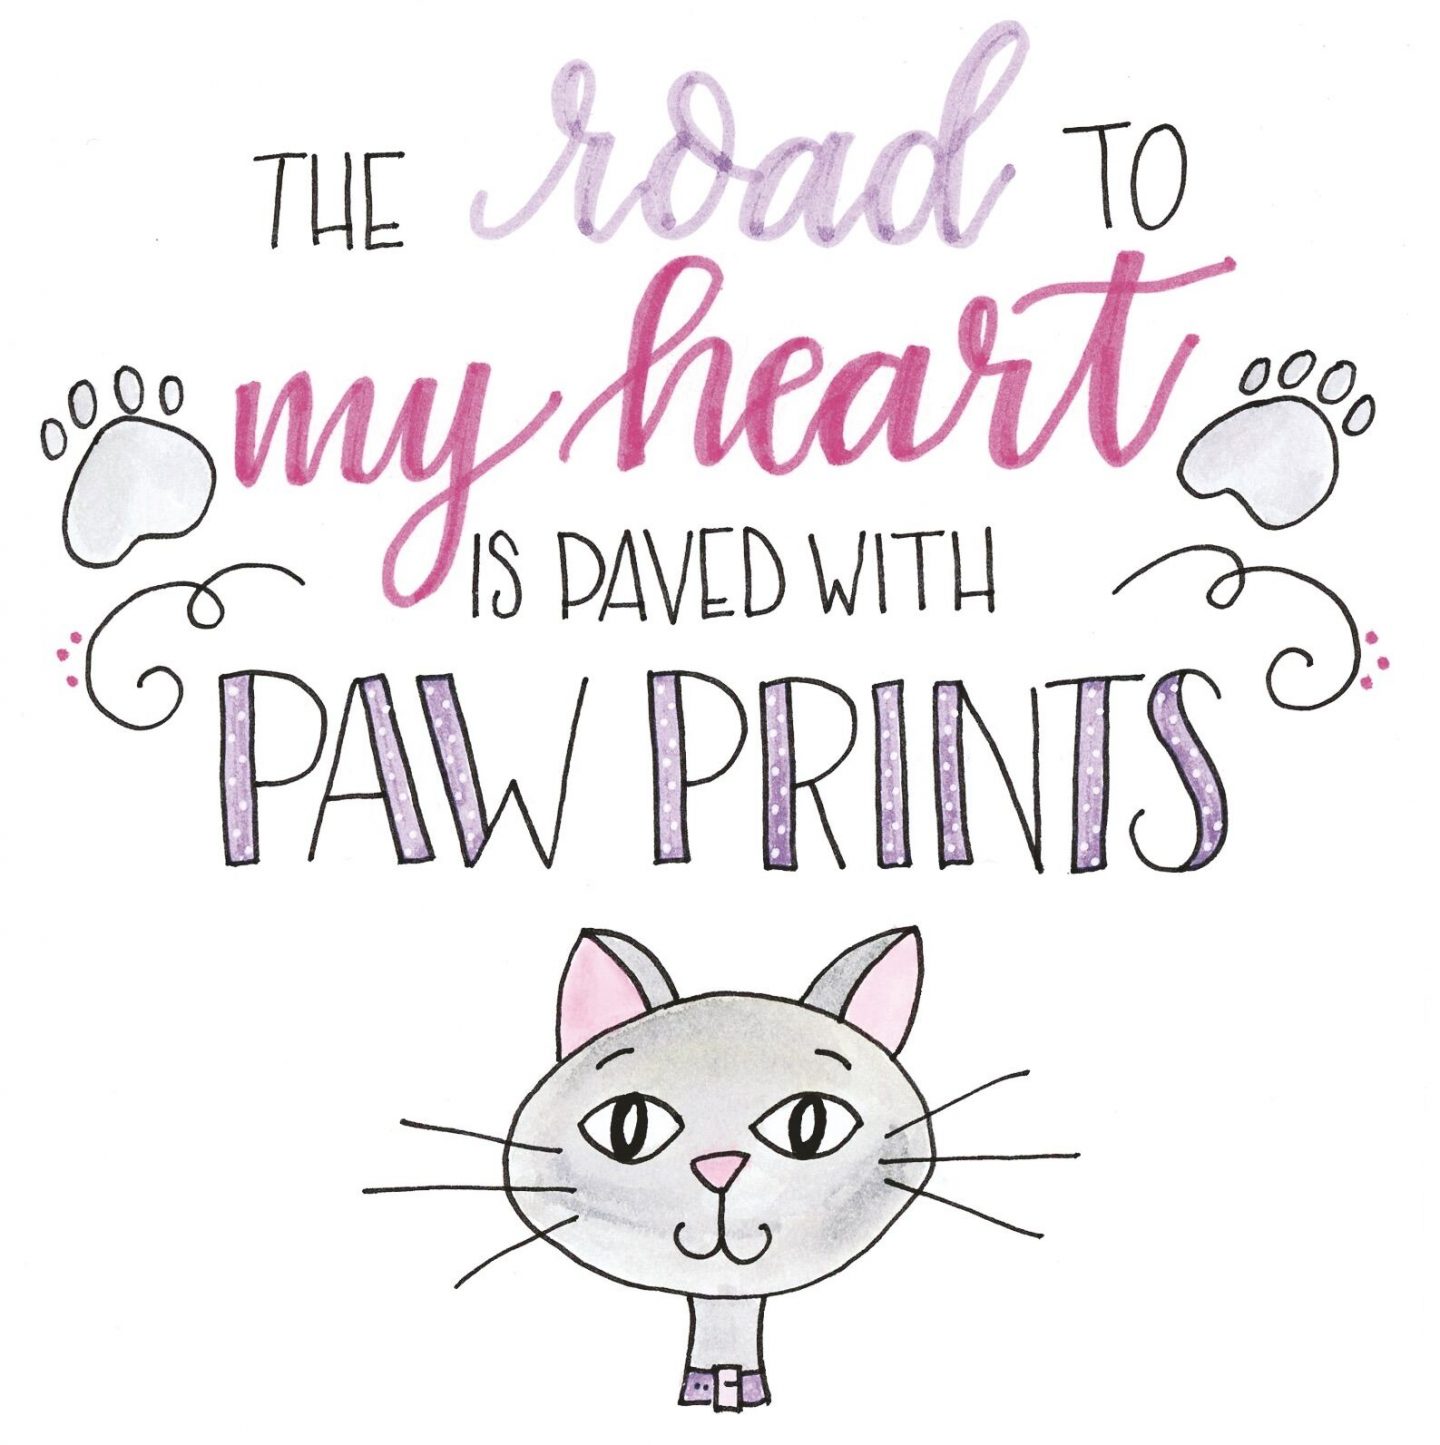 Inspirational quote about pets with handlettering by Amy Latta. #inspirationalquote #amylatta #handlettering